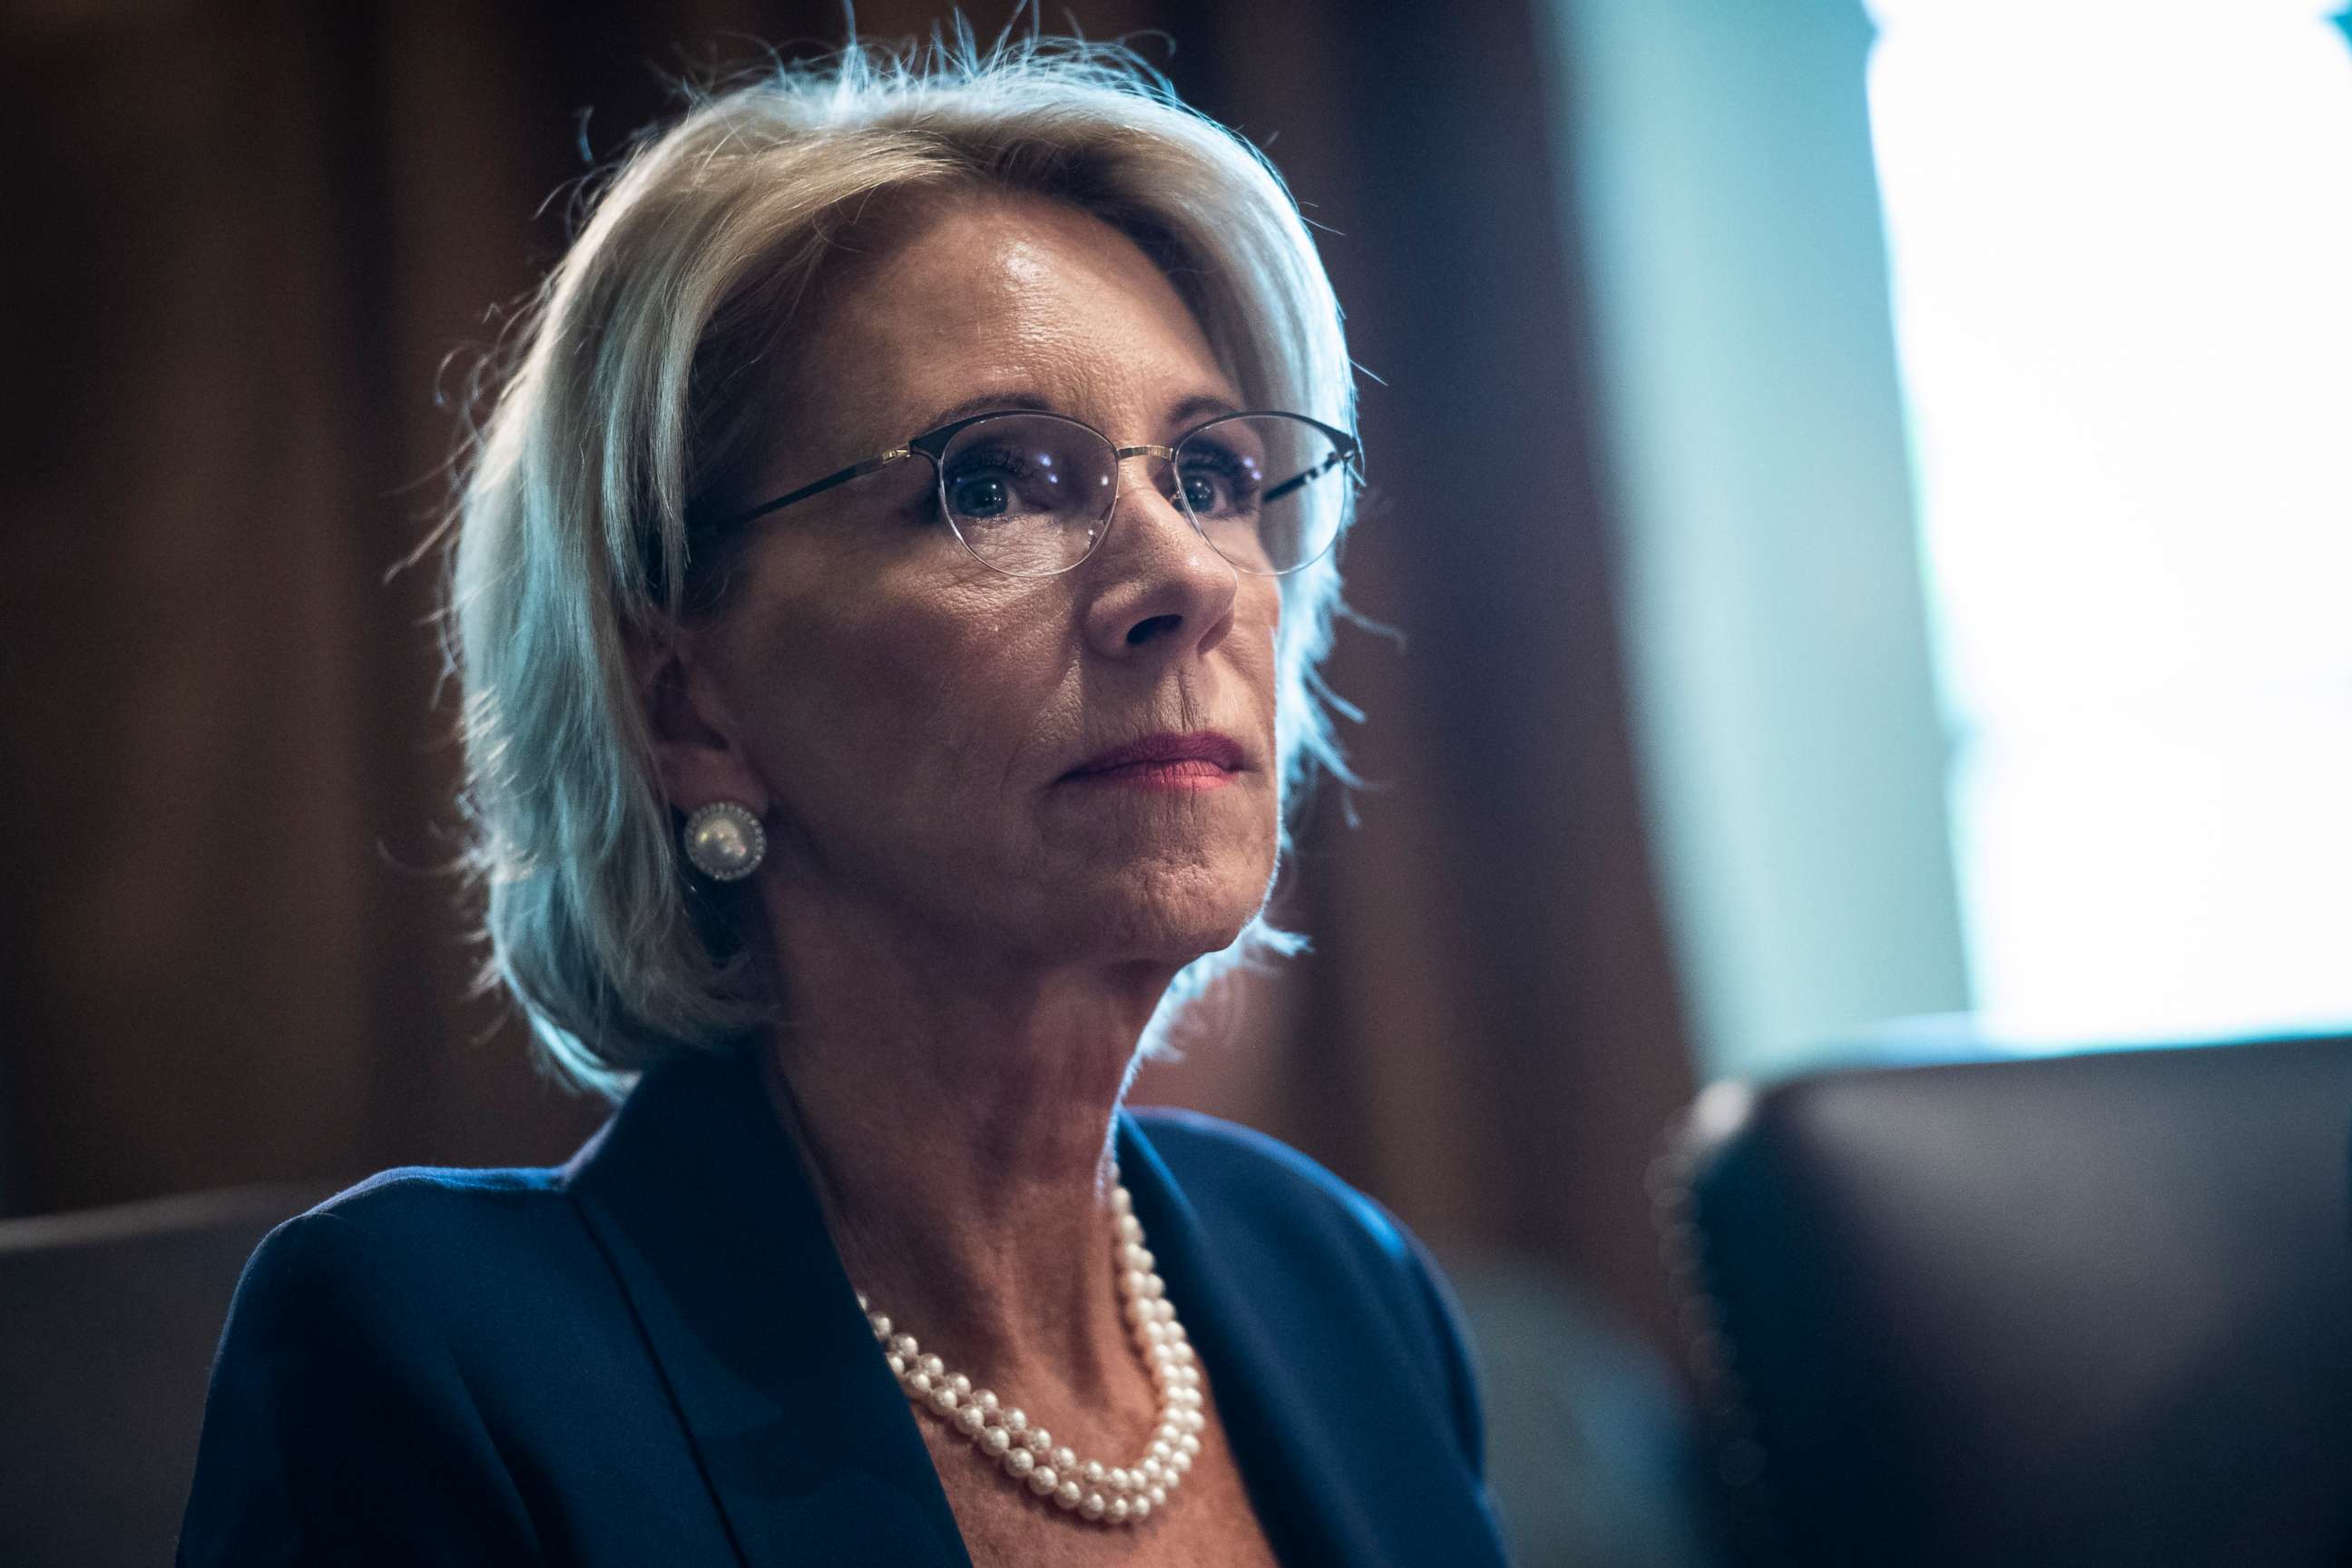 PHOTO: Secretary of Education Betsy DeVos listens as President Donald J. Trump speaks during a Cabinet meeting in the Cabinet Room of the White House on Thursday, Aug 16, 2018 in Washington.